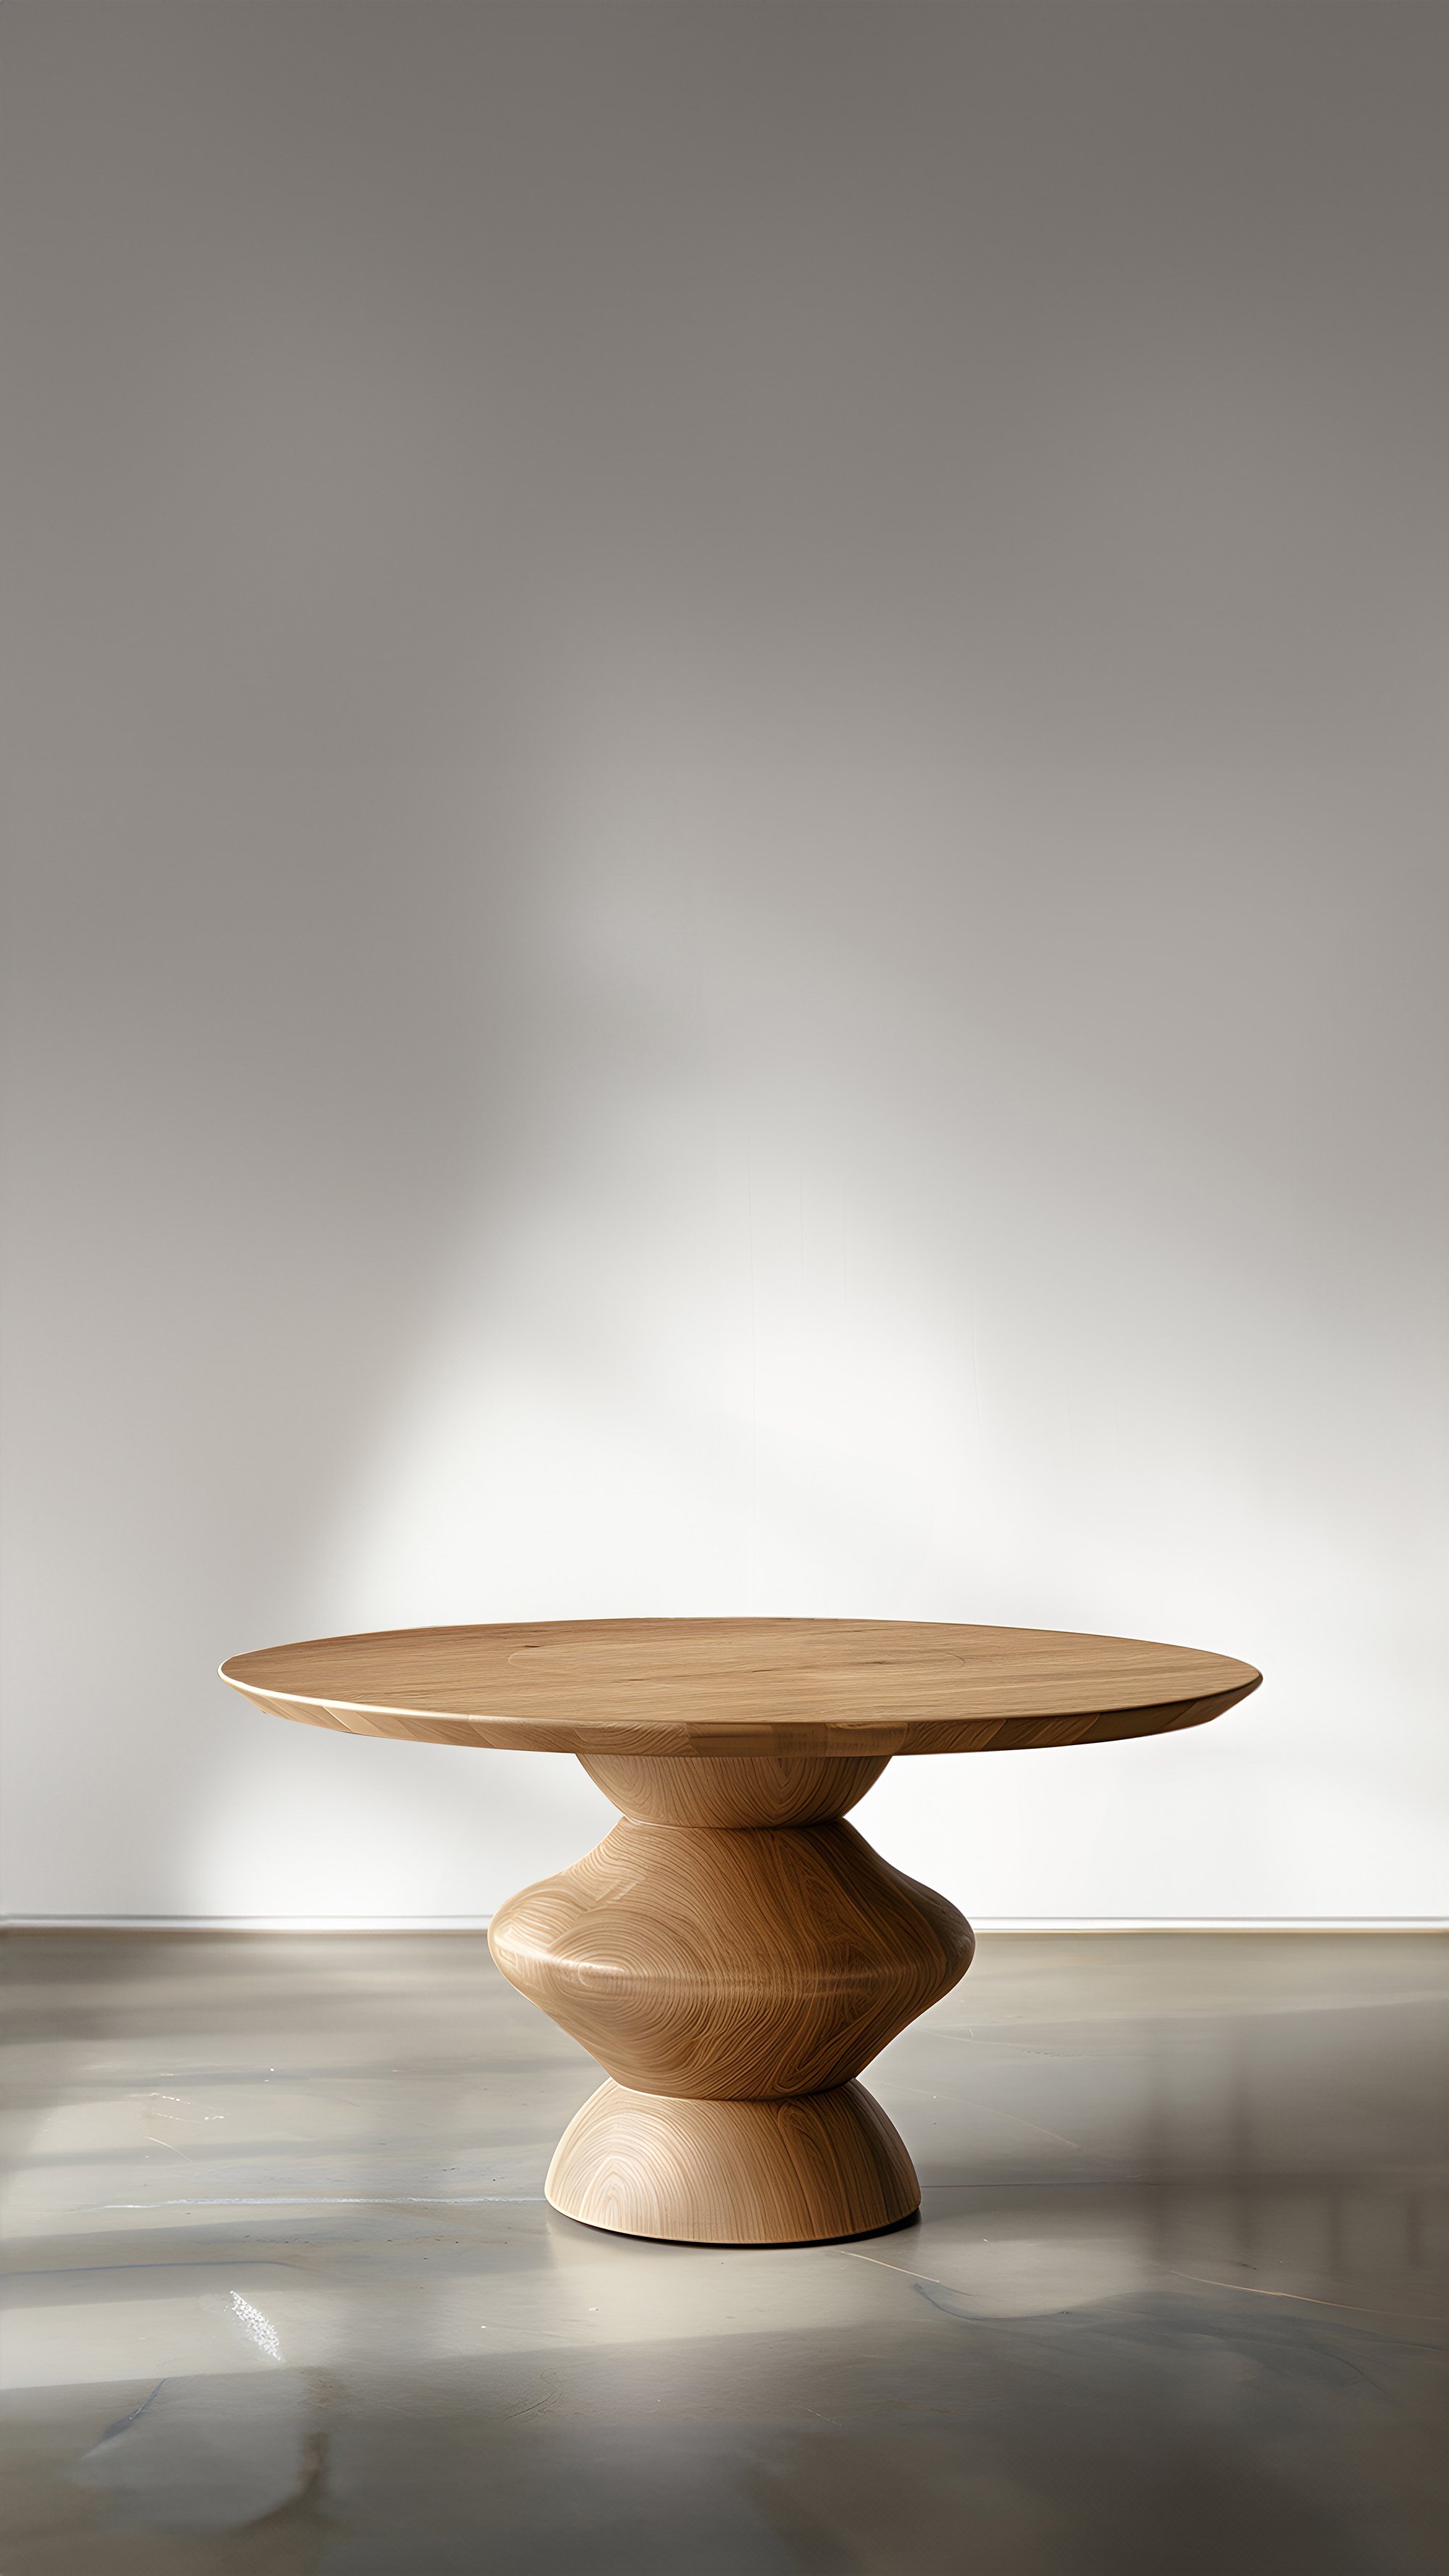 Socle Series No15, Console Tables by NONO, Wood Elegance - 6.jpg